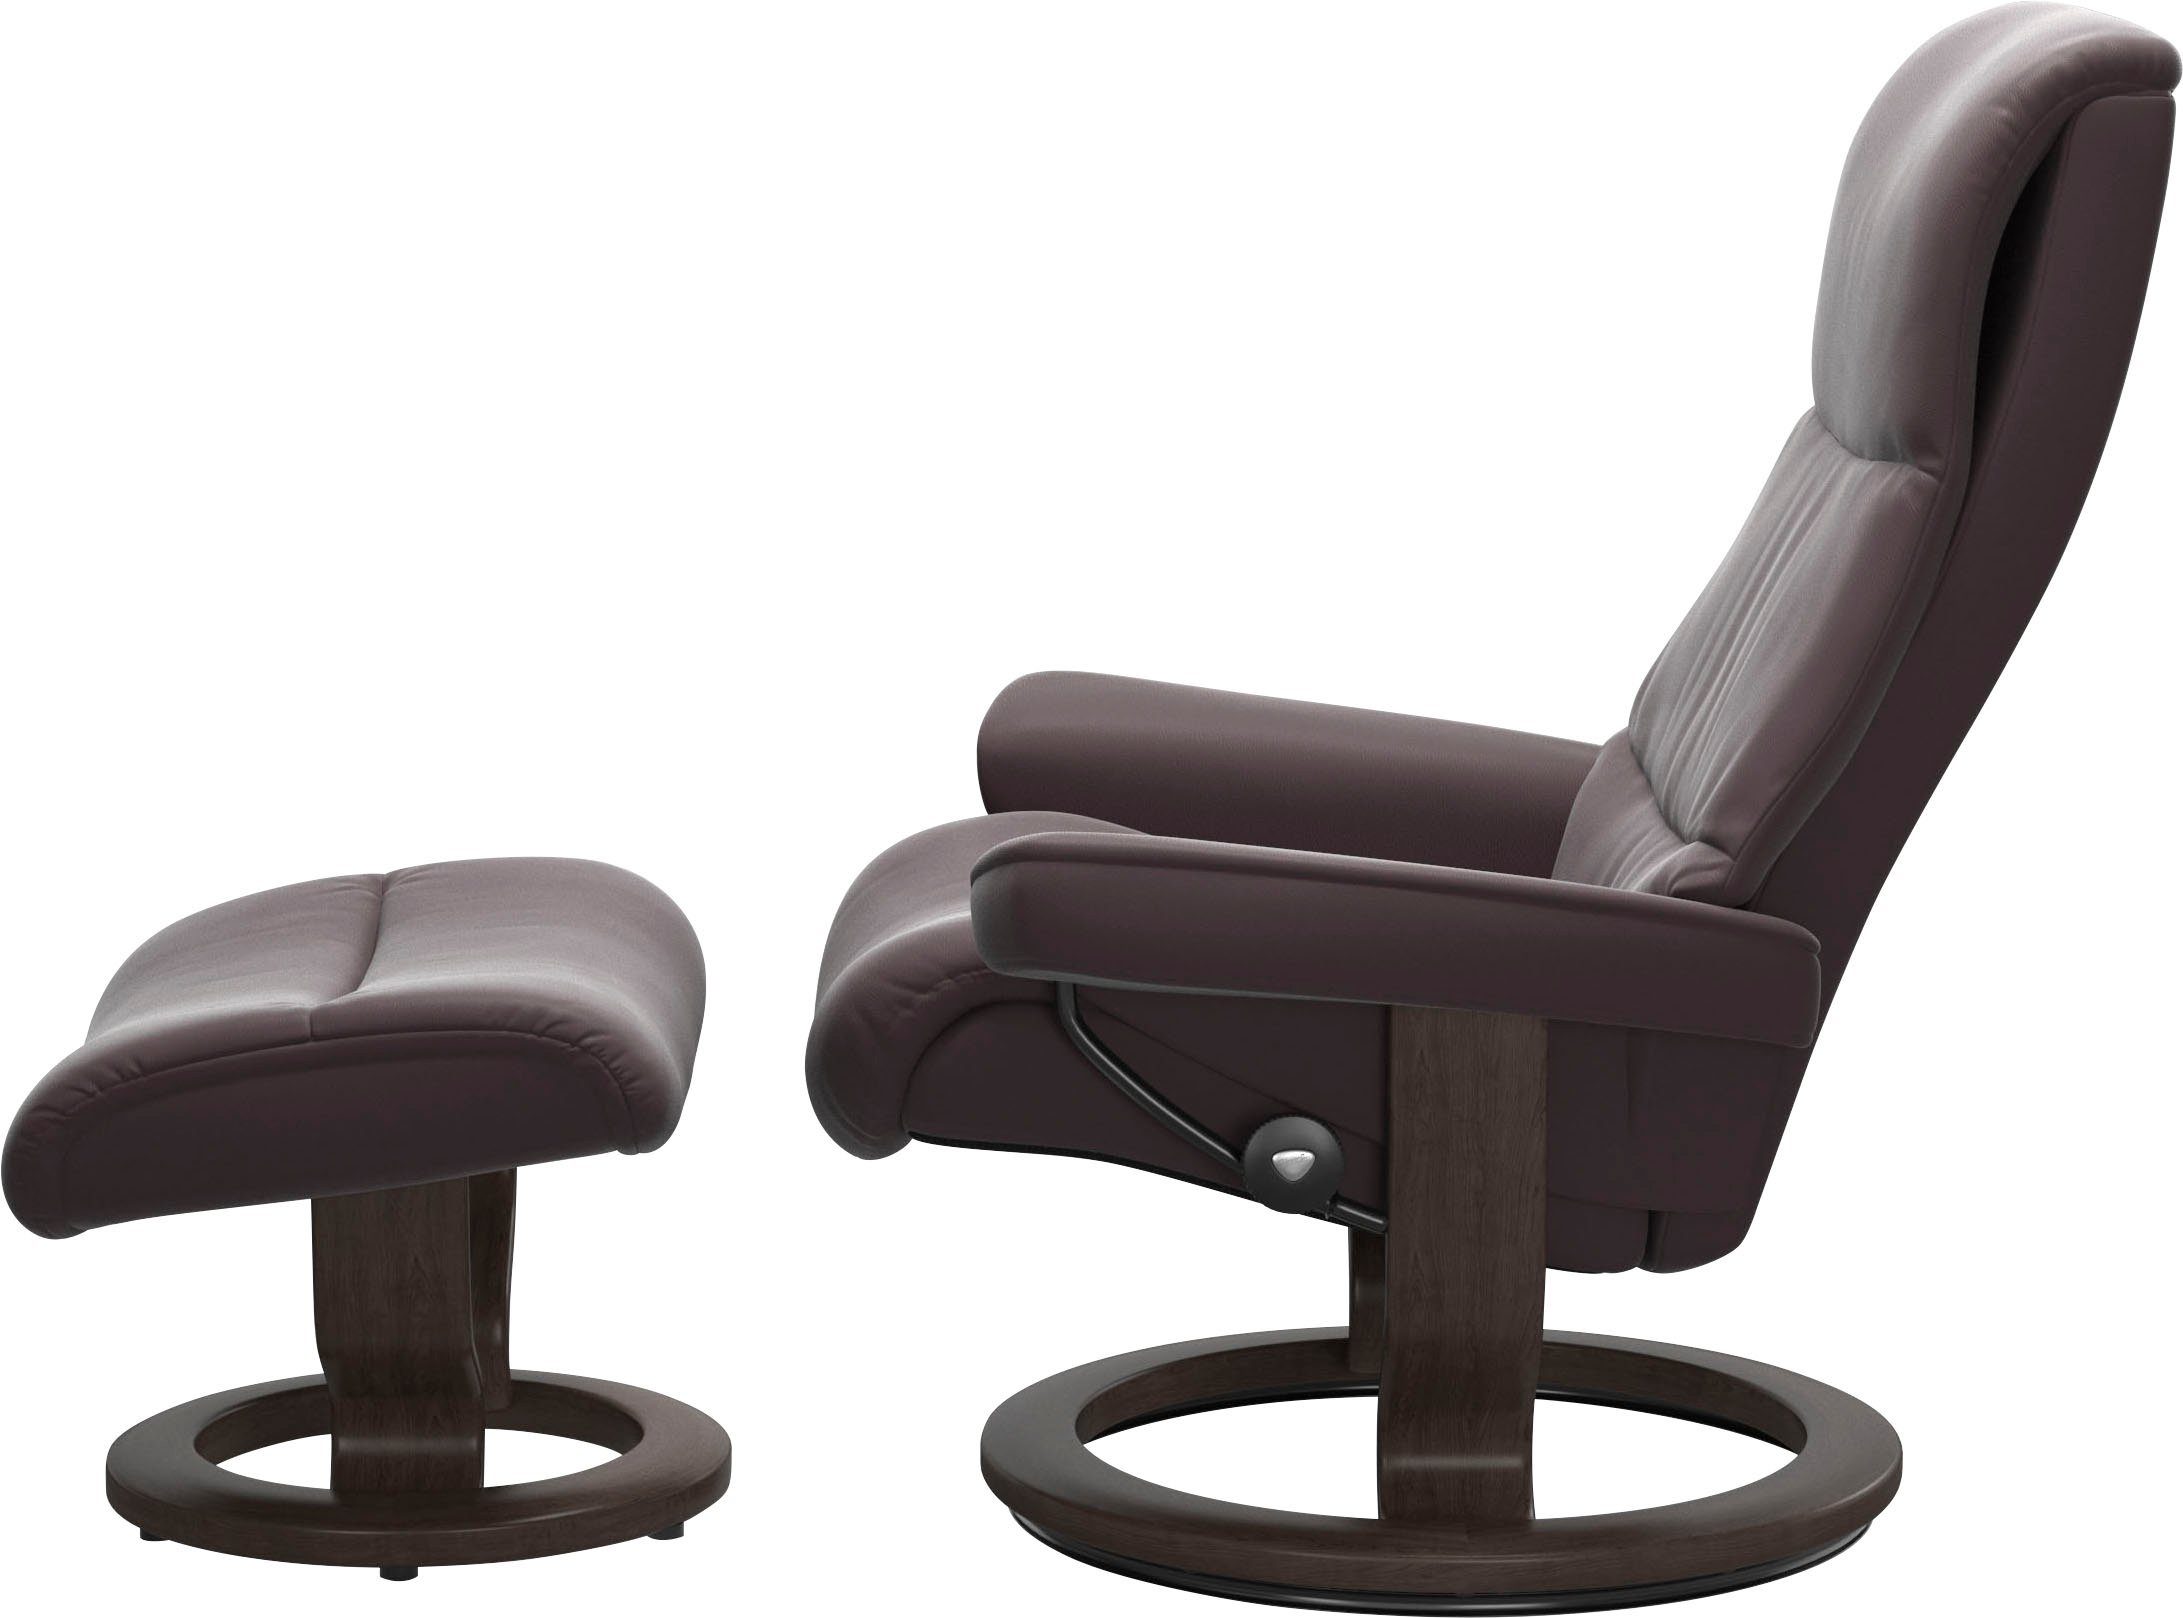 Stressless® mit Classic Relaxsessel Wenge View, Base, L,Gestell Größe